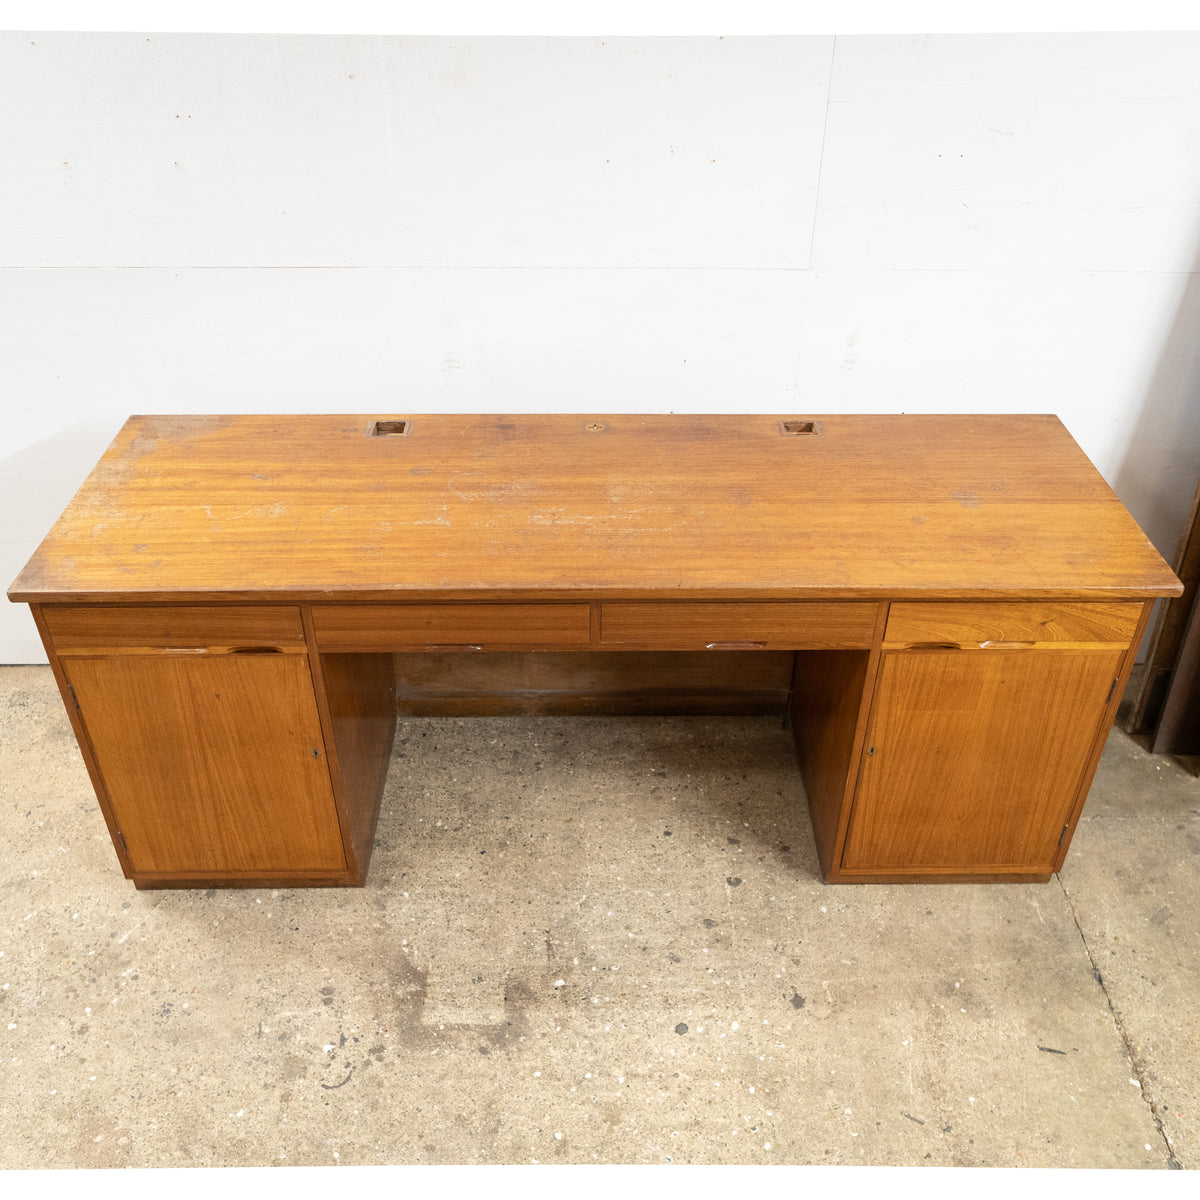 Reclaimed Mid-Century Solid Teak Sideboard Desk Unit With Cupboards &amp; Drawers | The Architectural Forum